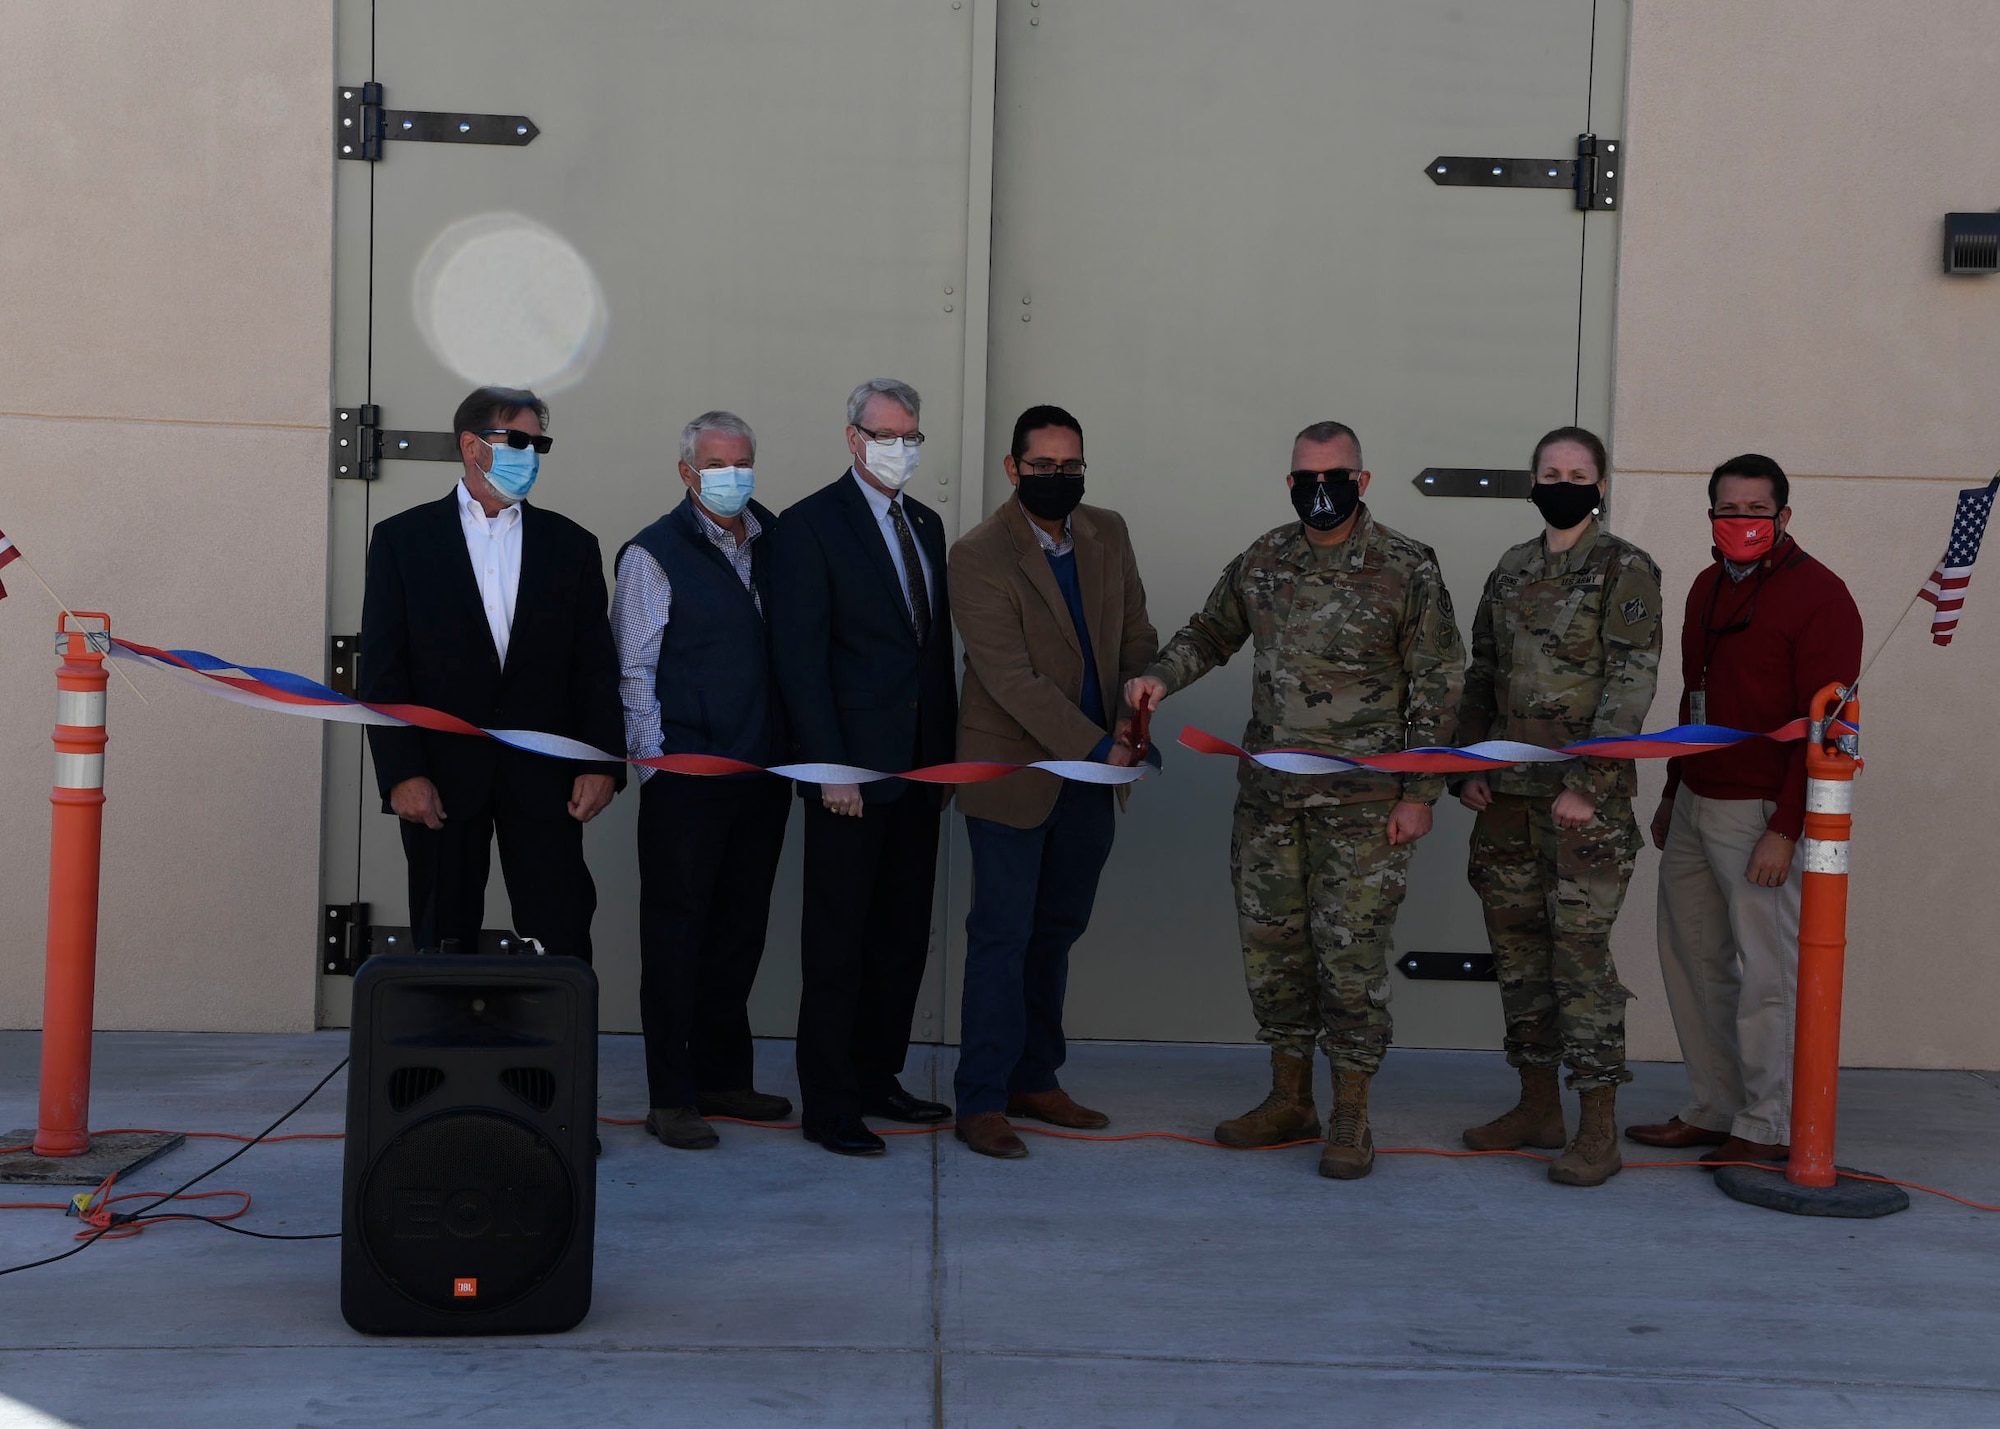 Members of the Air Force Research Laboratory Space Vehicles Directorate and U.S. Army Corps of Engineers celebrate the opening of the Deployable Structures Laboratory at Kirtland Air Force Base, New Mexico, Oct. 29, 2020. The laboratory was constructed by Sky Blue Builders and designed by Studio Southwest Architects, both of Albuquerque, N.M., and will be used for testing novel deployable space structures. (U.S. Air Force photo by Airman 1st Class Ireland Summers)